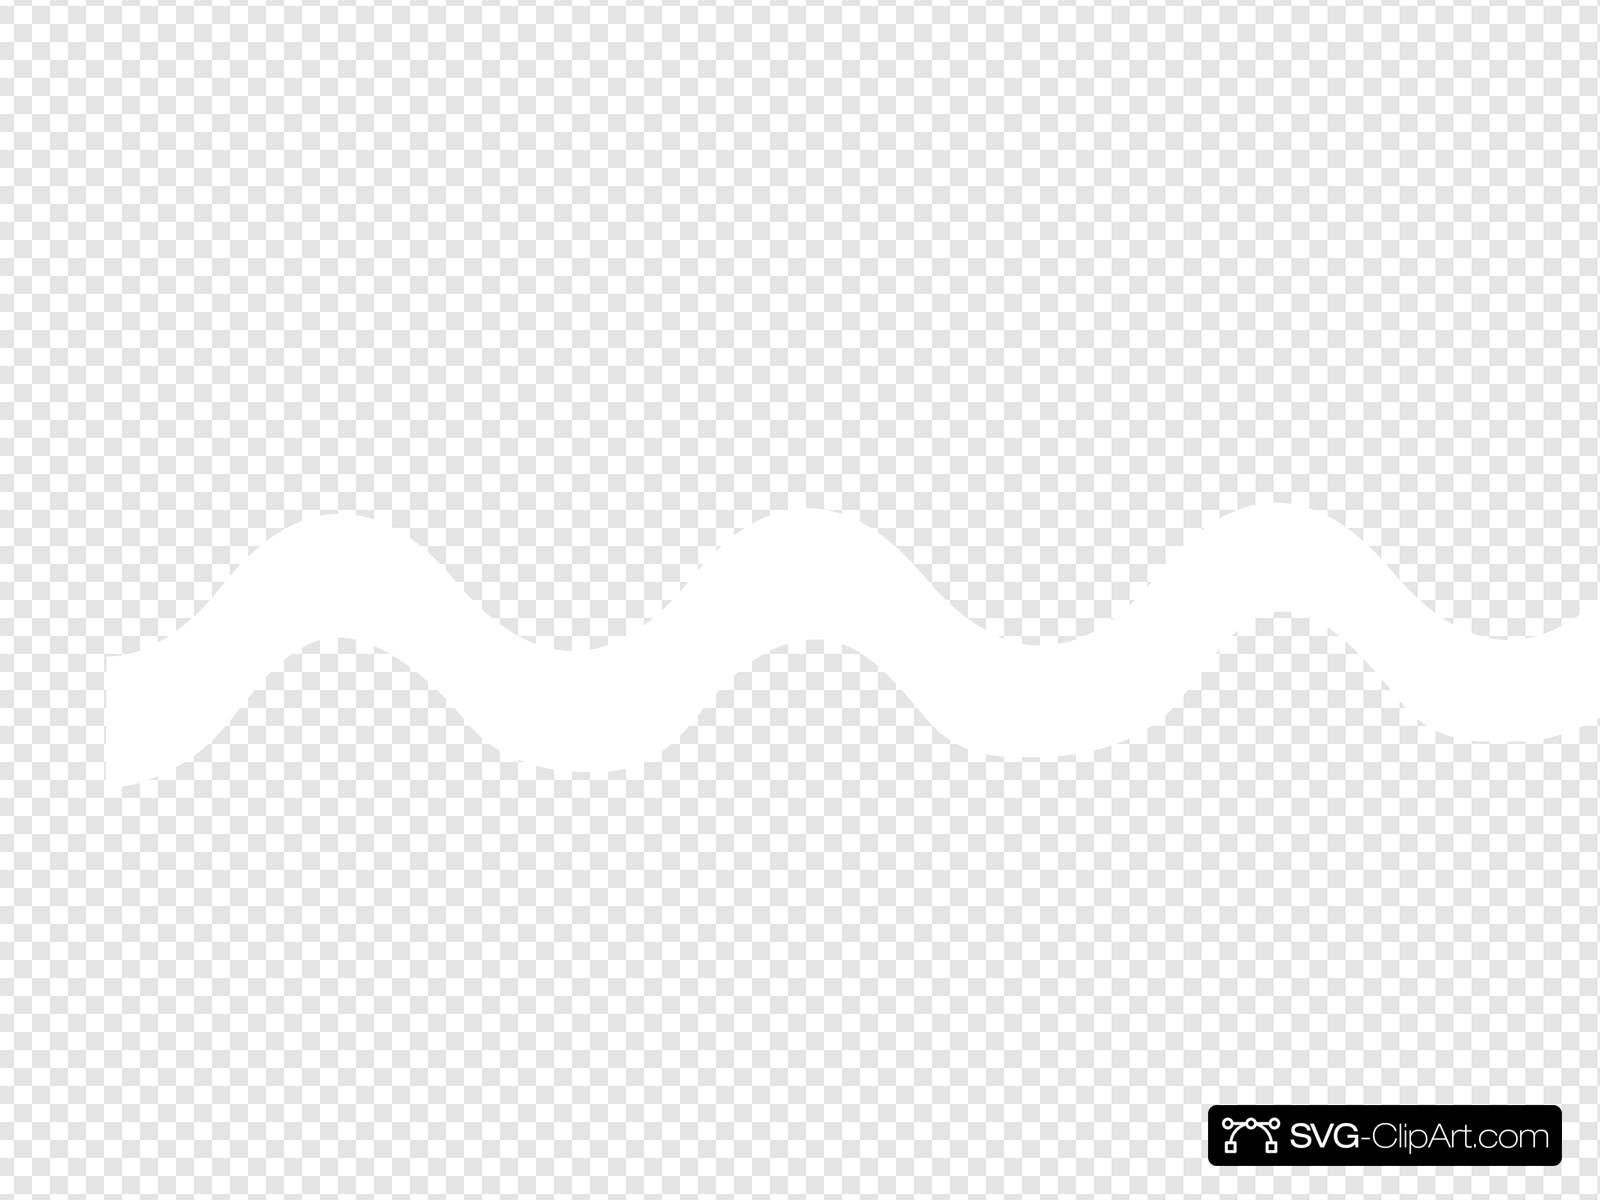 Wavy Line White Thick Clip art, Icon and SVG